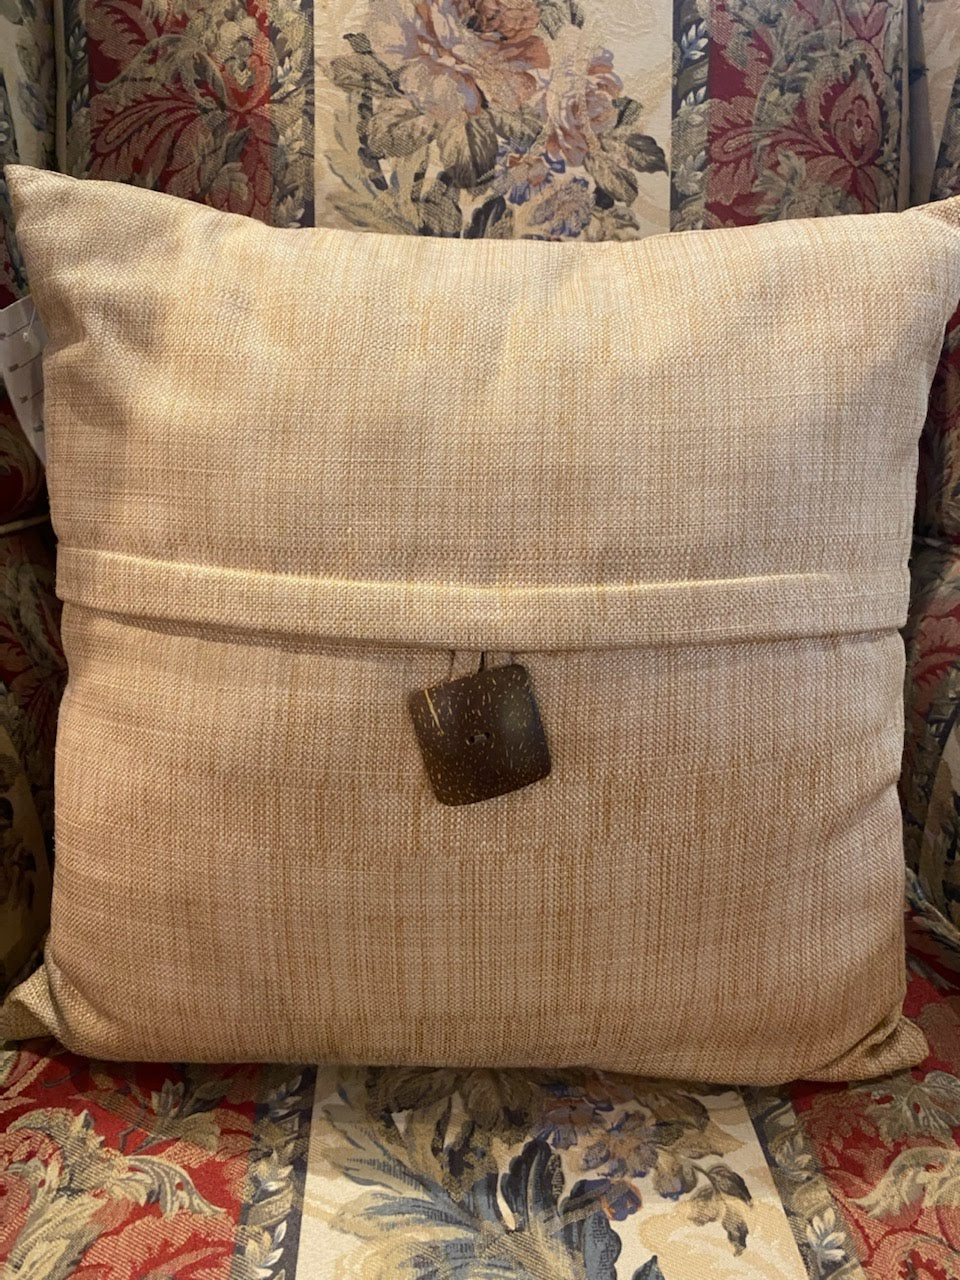 Tan pillow with brown button